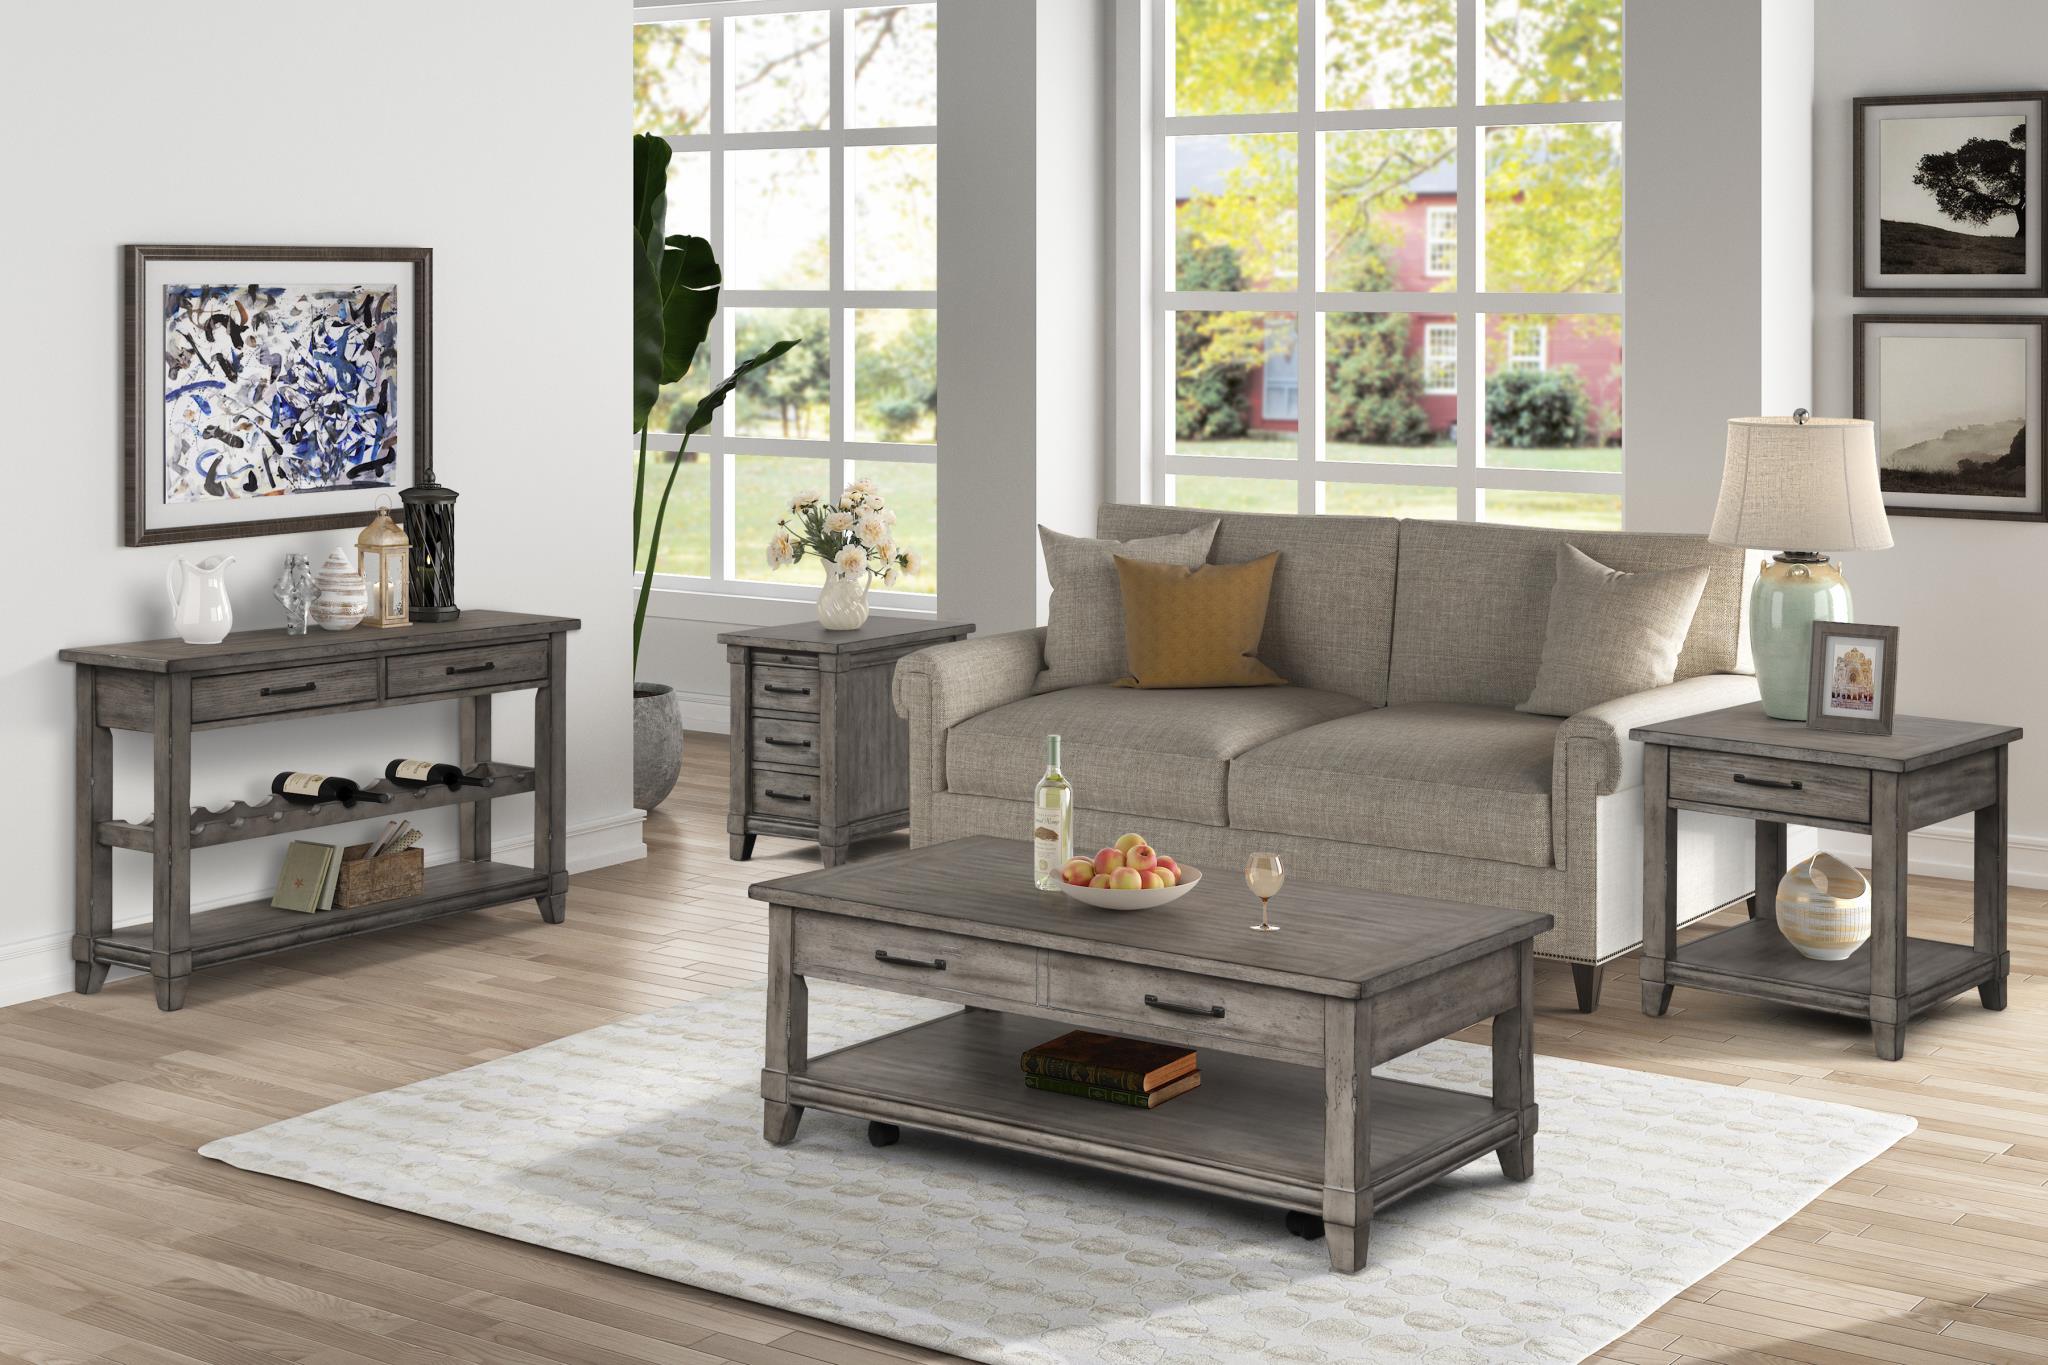 Modern, Transitional Coffee Table and 2 End Tables Rustic 1284-001-3pcs in Gray 